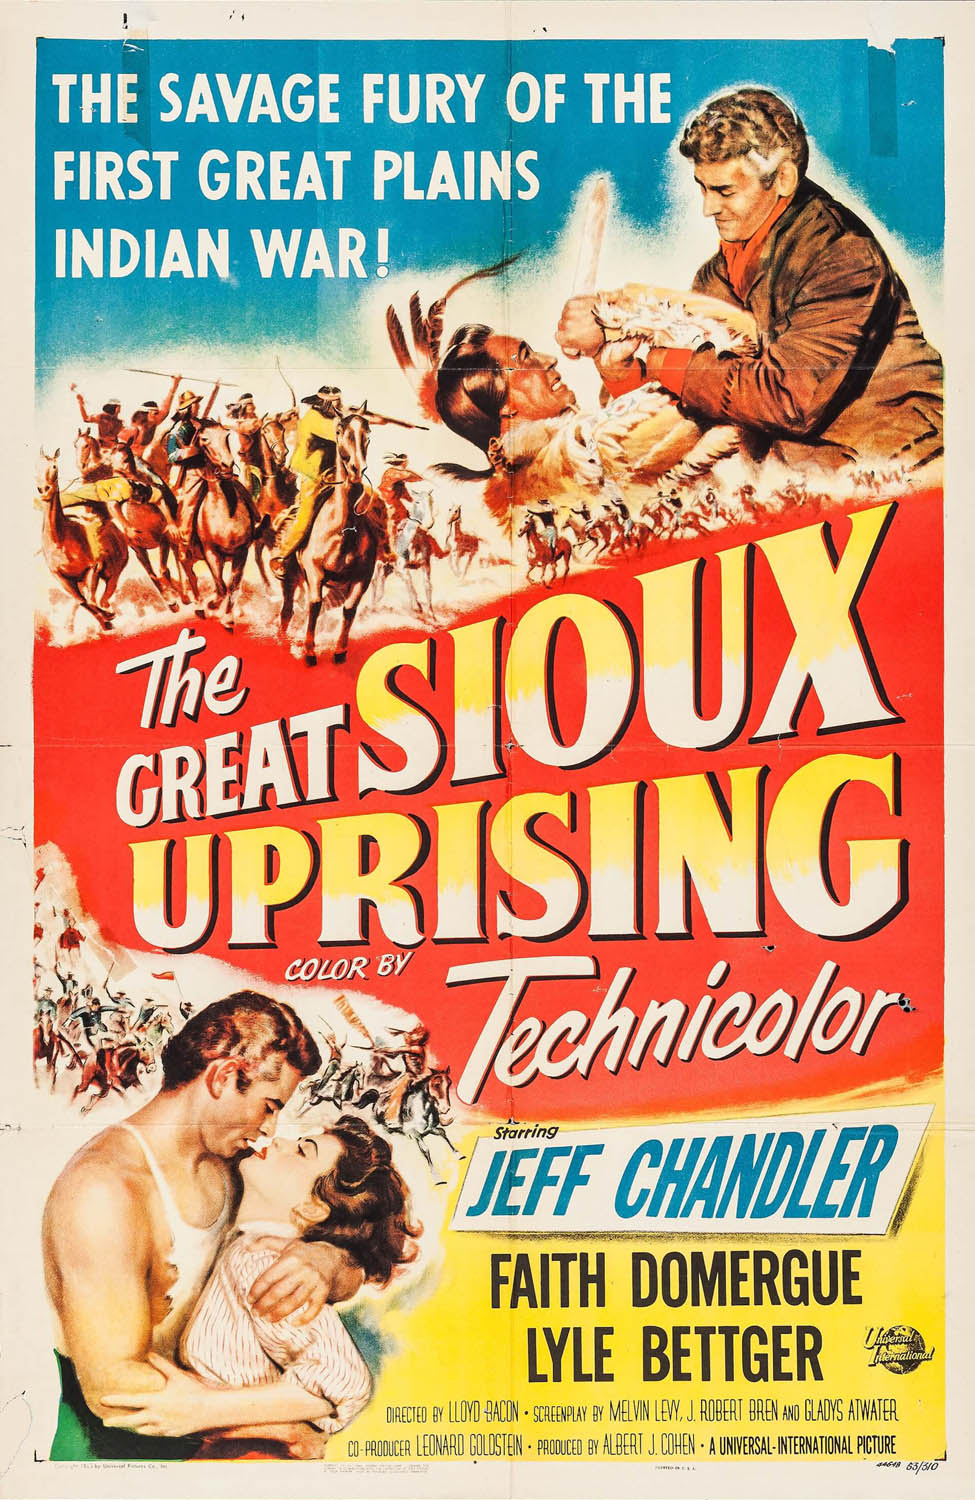 GREAT SIOUX UPRISING, THE